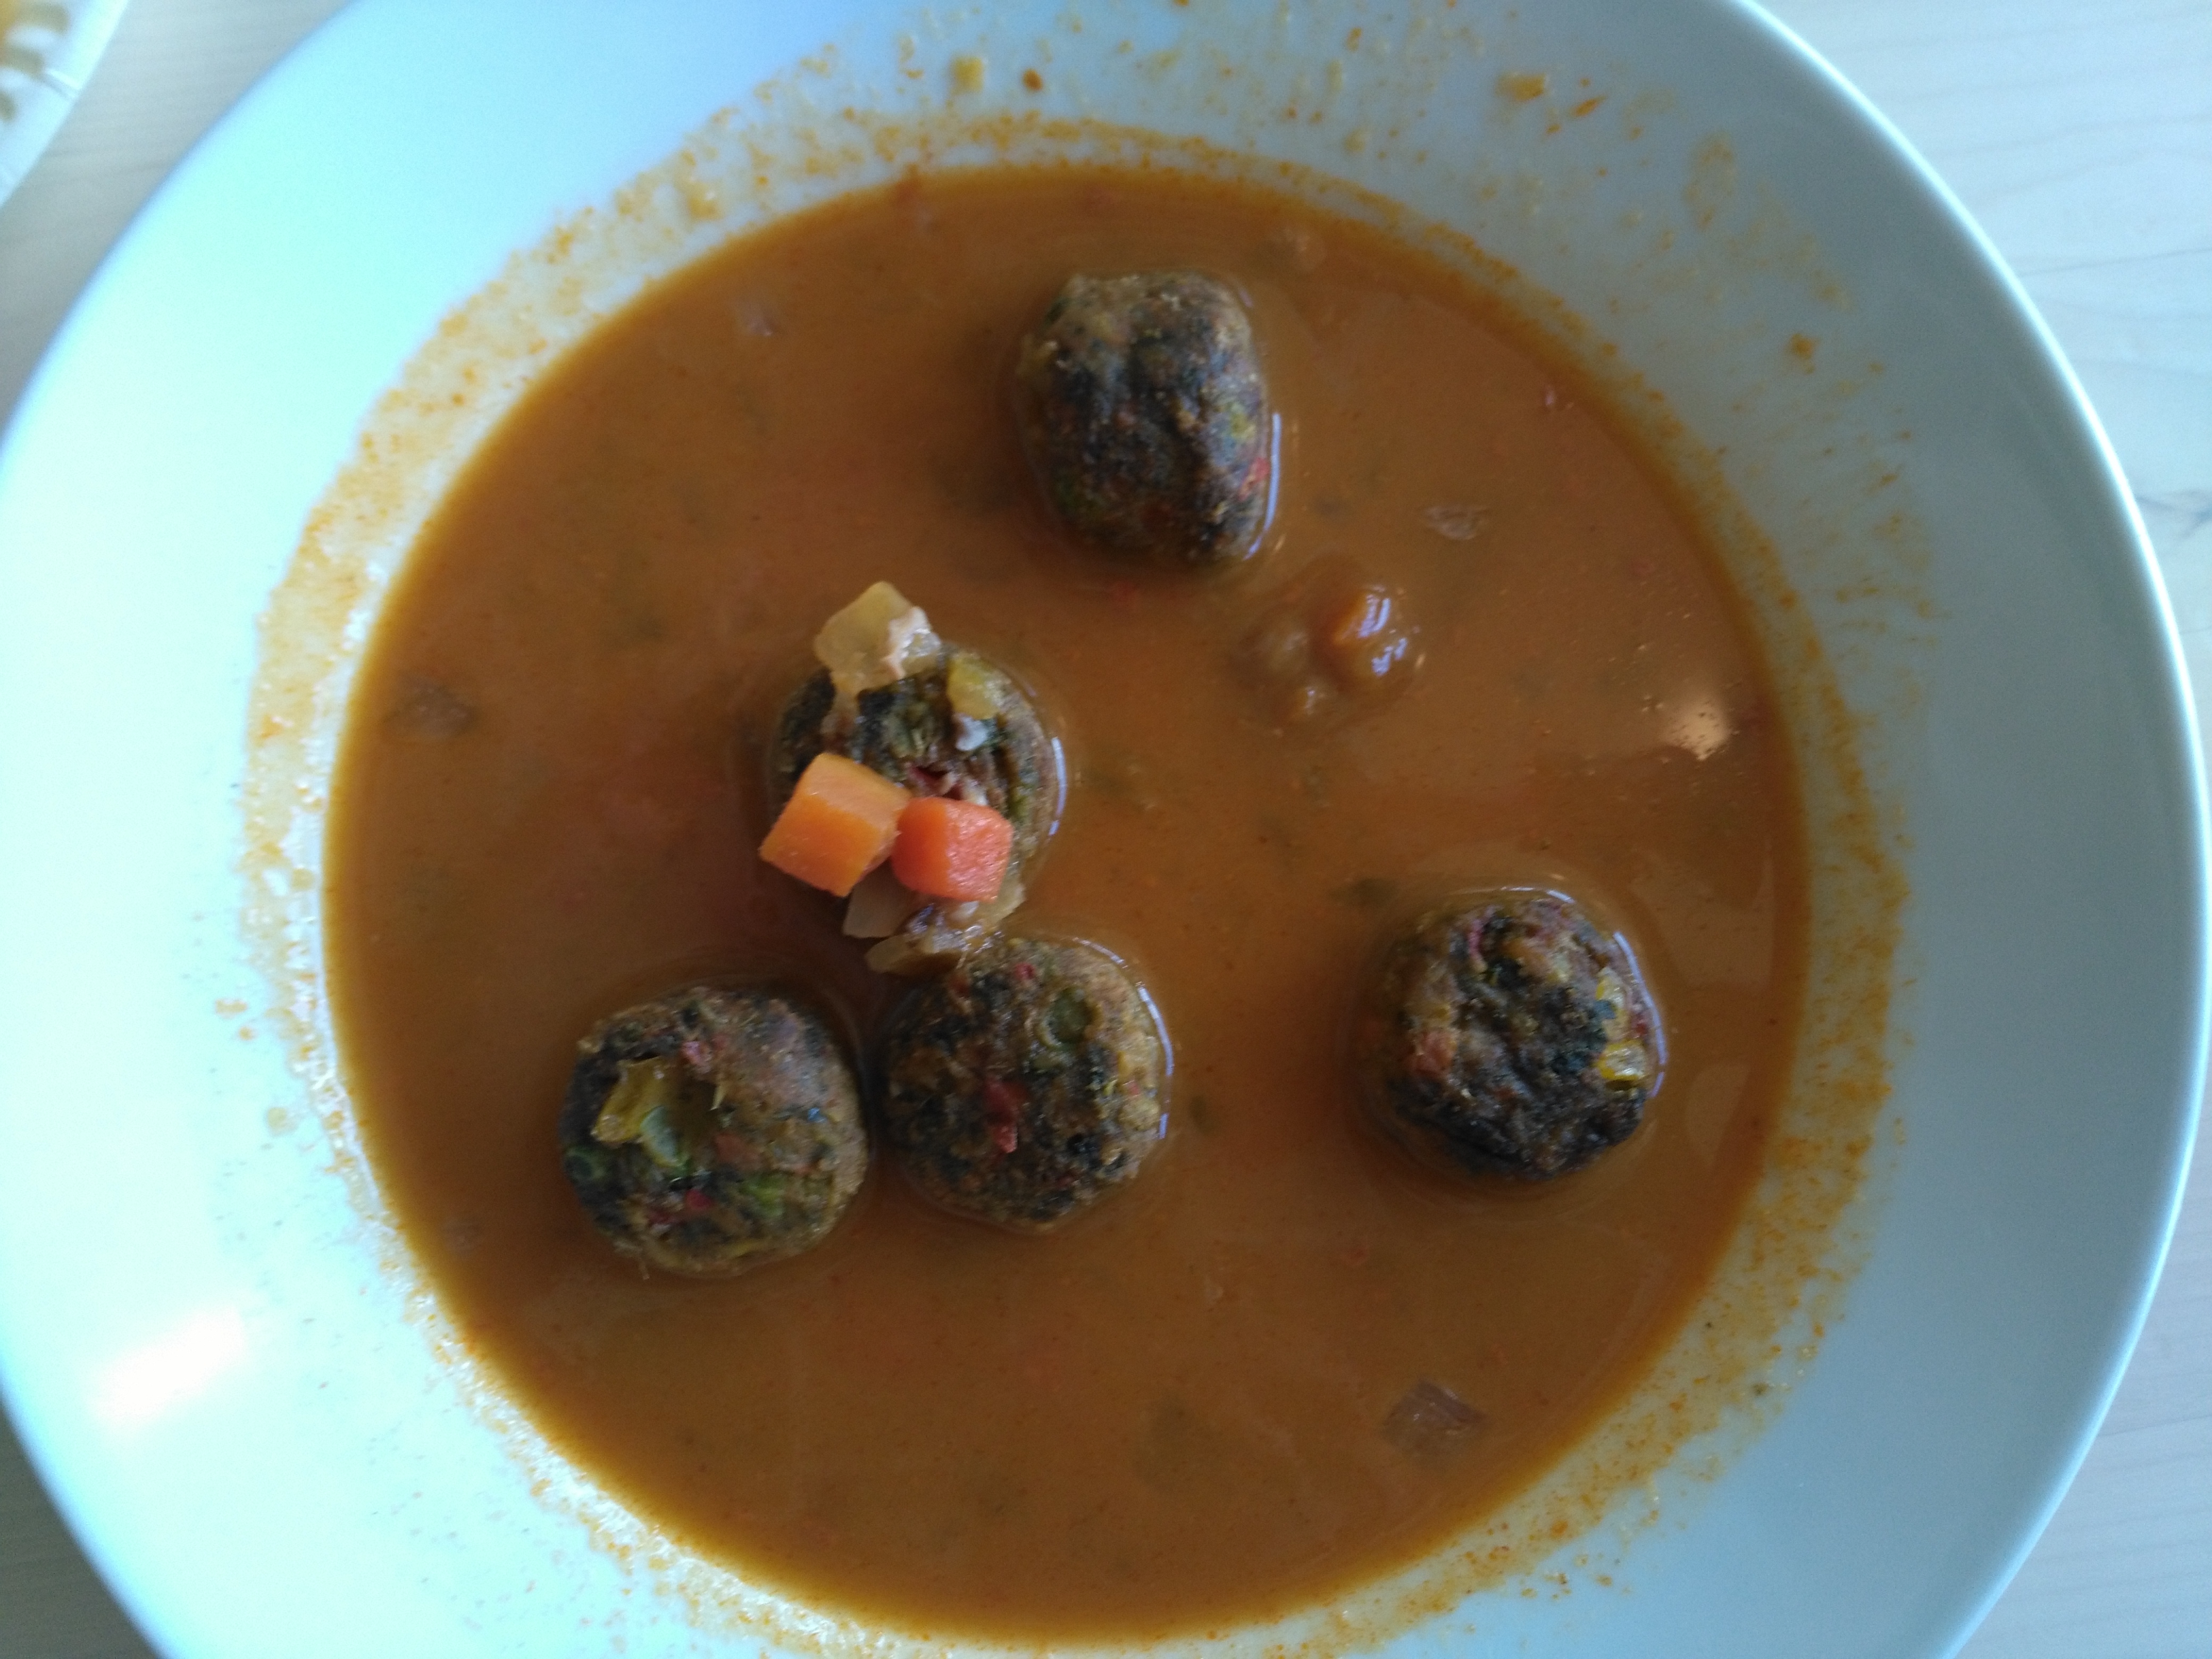 Tom yum soup with veggie meatballs at Ikea (yes you read that correctly).